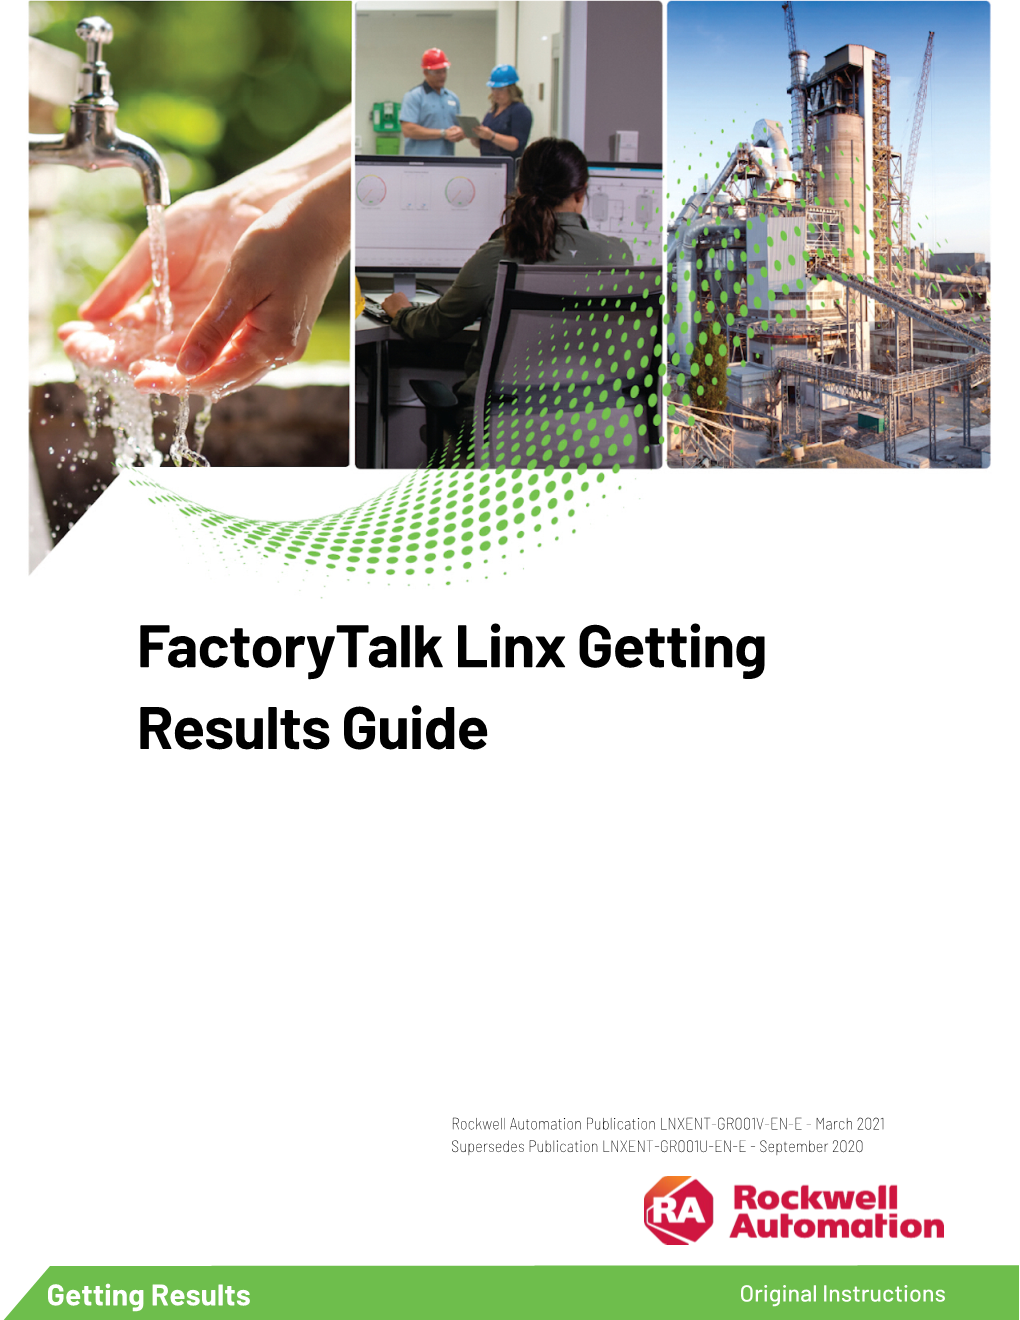 Factorytalk Linx Getting Results Guide